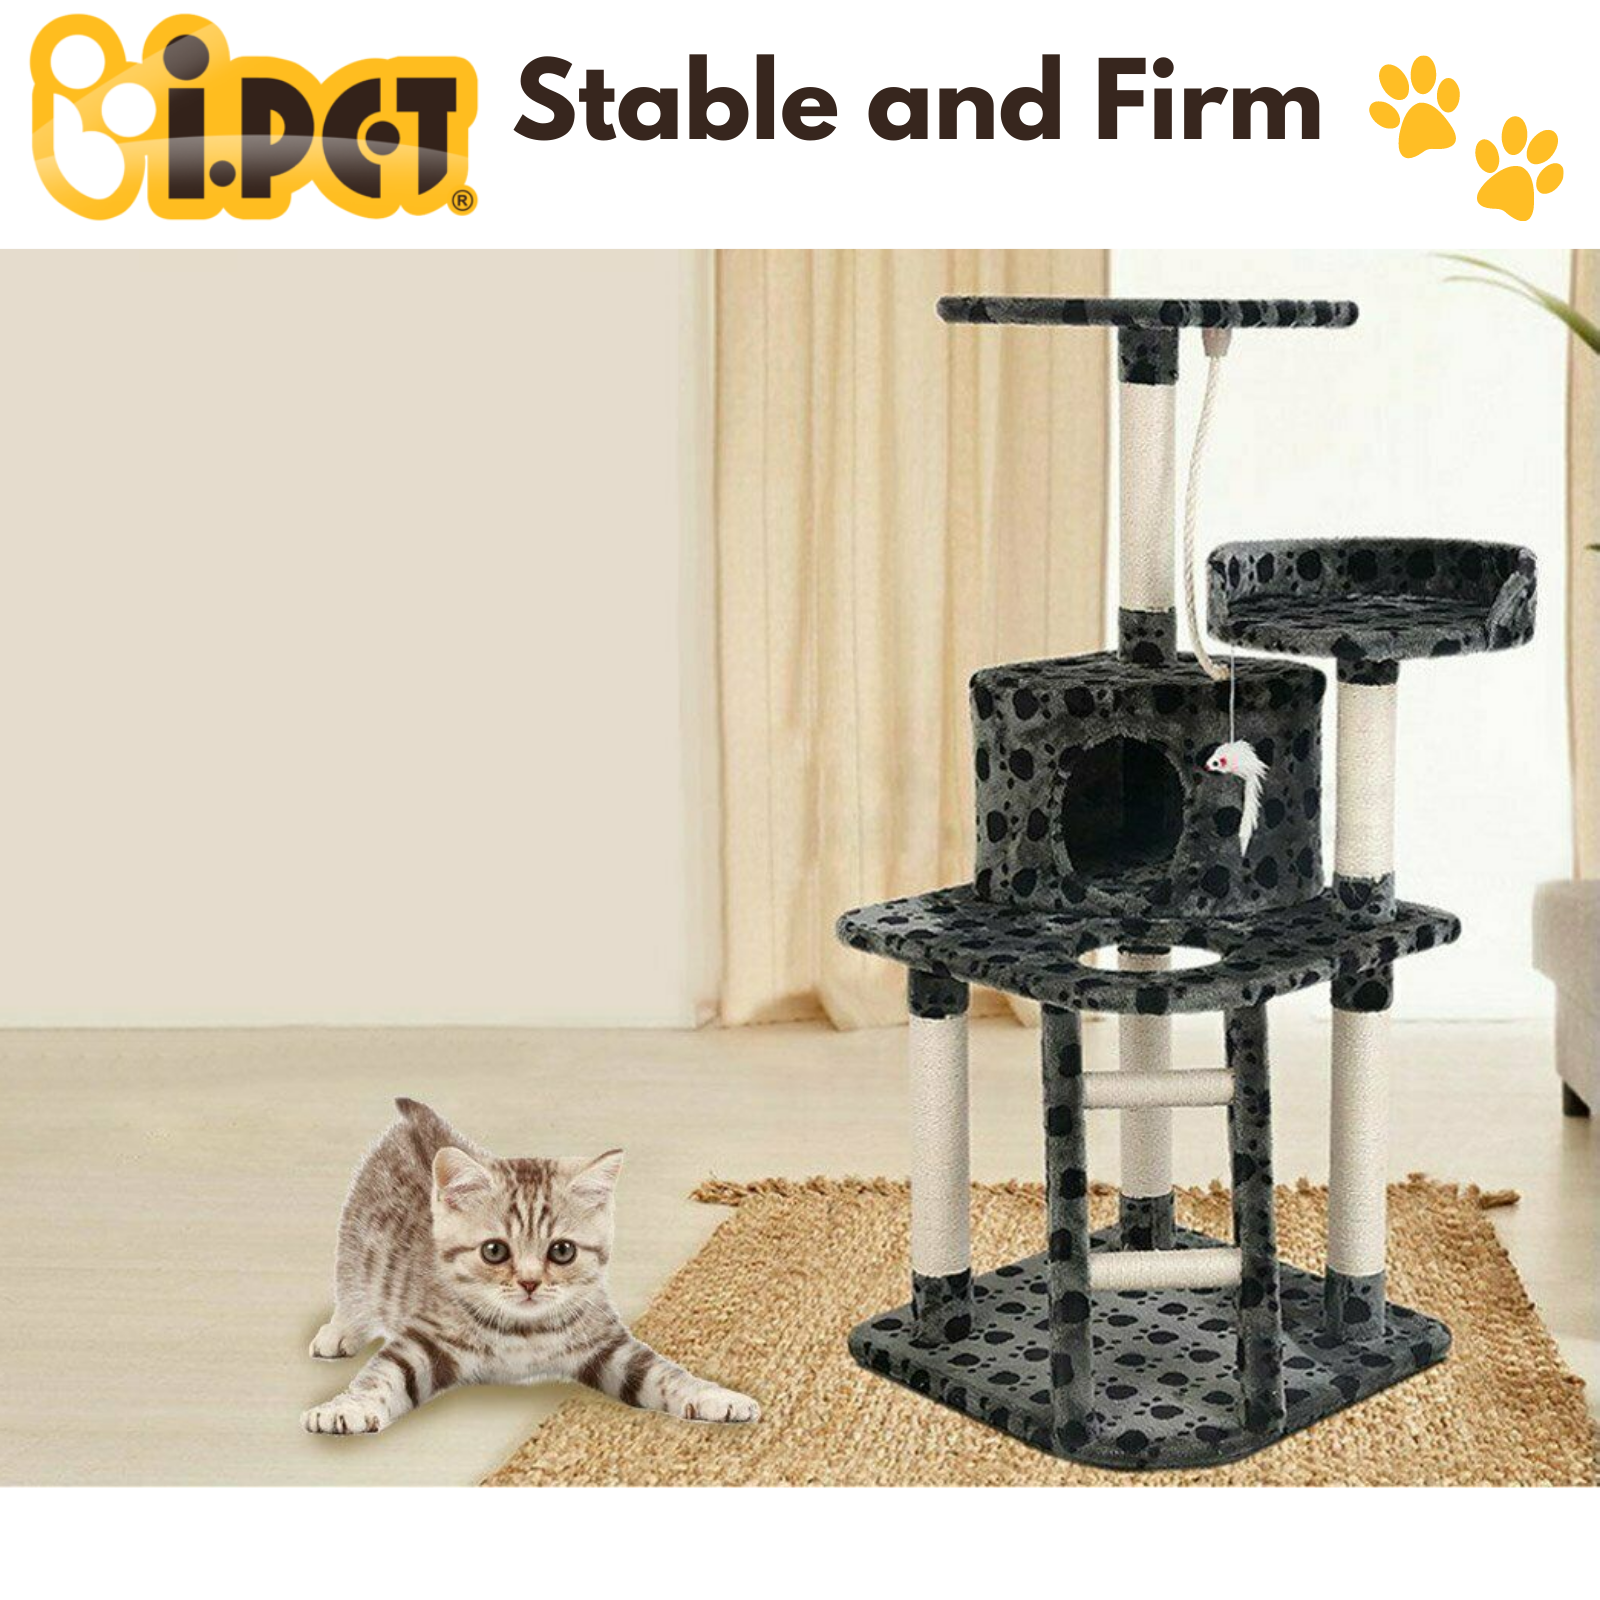 i.Pet Cat Scratching Post Tree has multi-platforms with ample play and rest areas for scratching, playing, perching and climbing